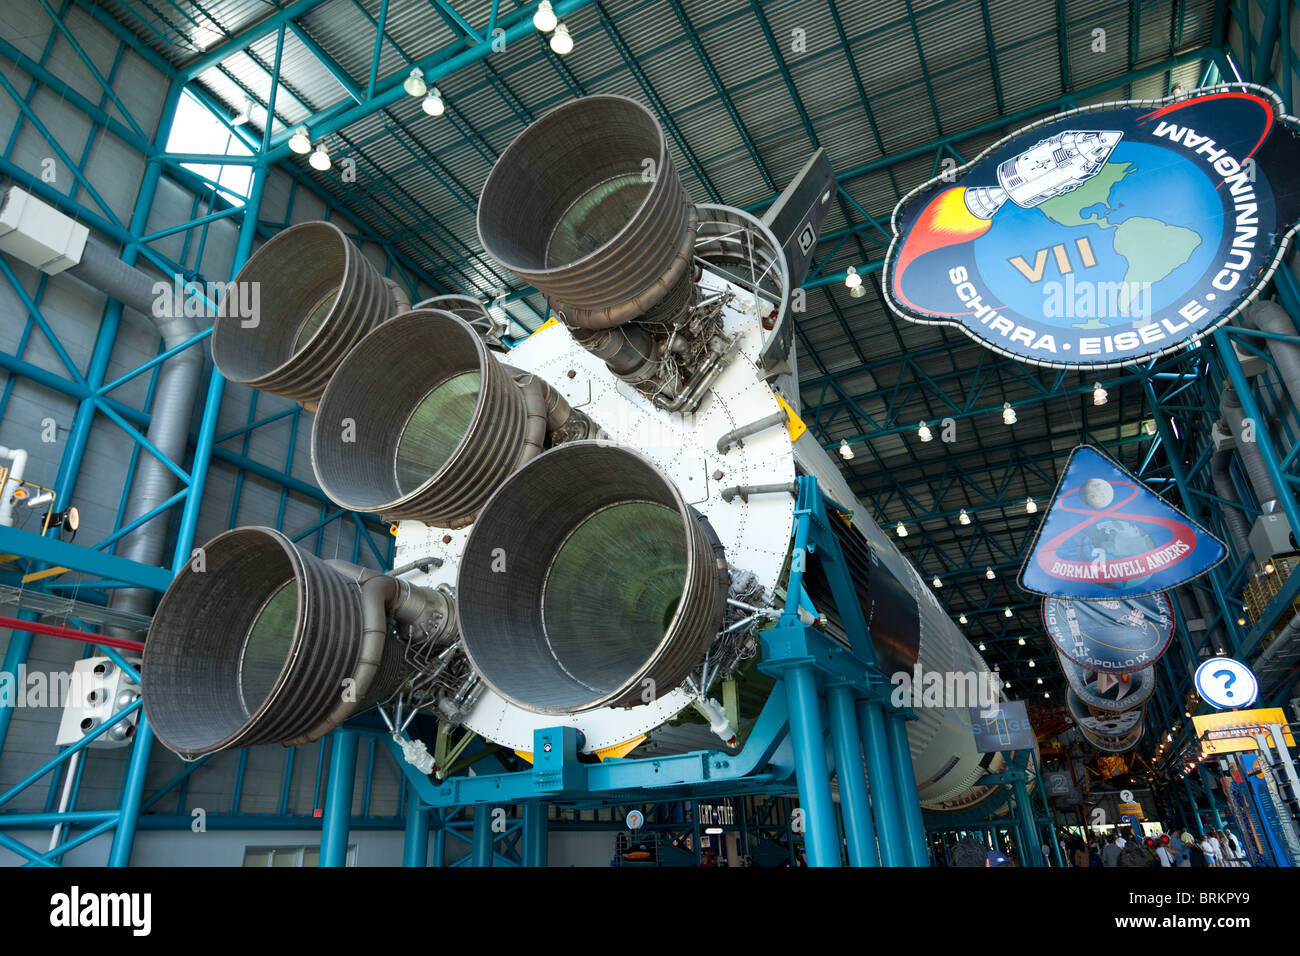 The Saturn V moon rocket in the Kennedy Space Centre,Orlando, Florida. Stock Photo